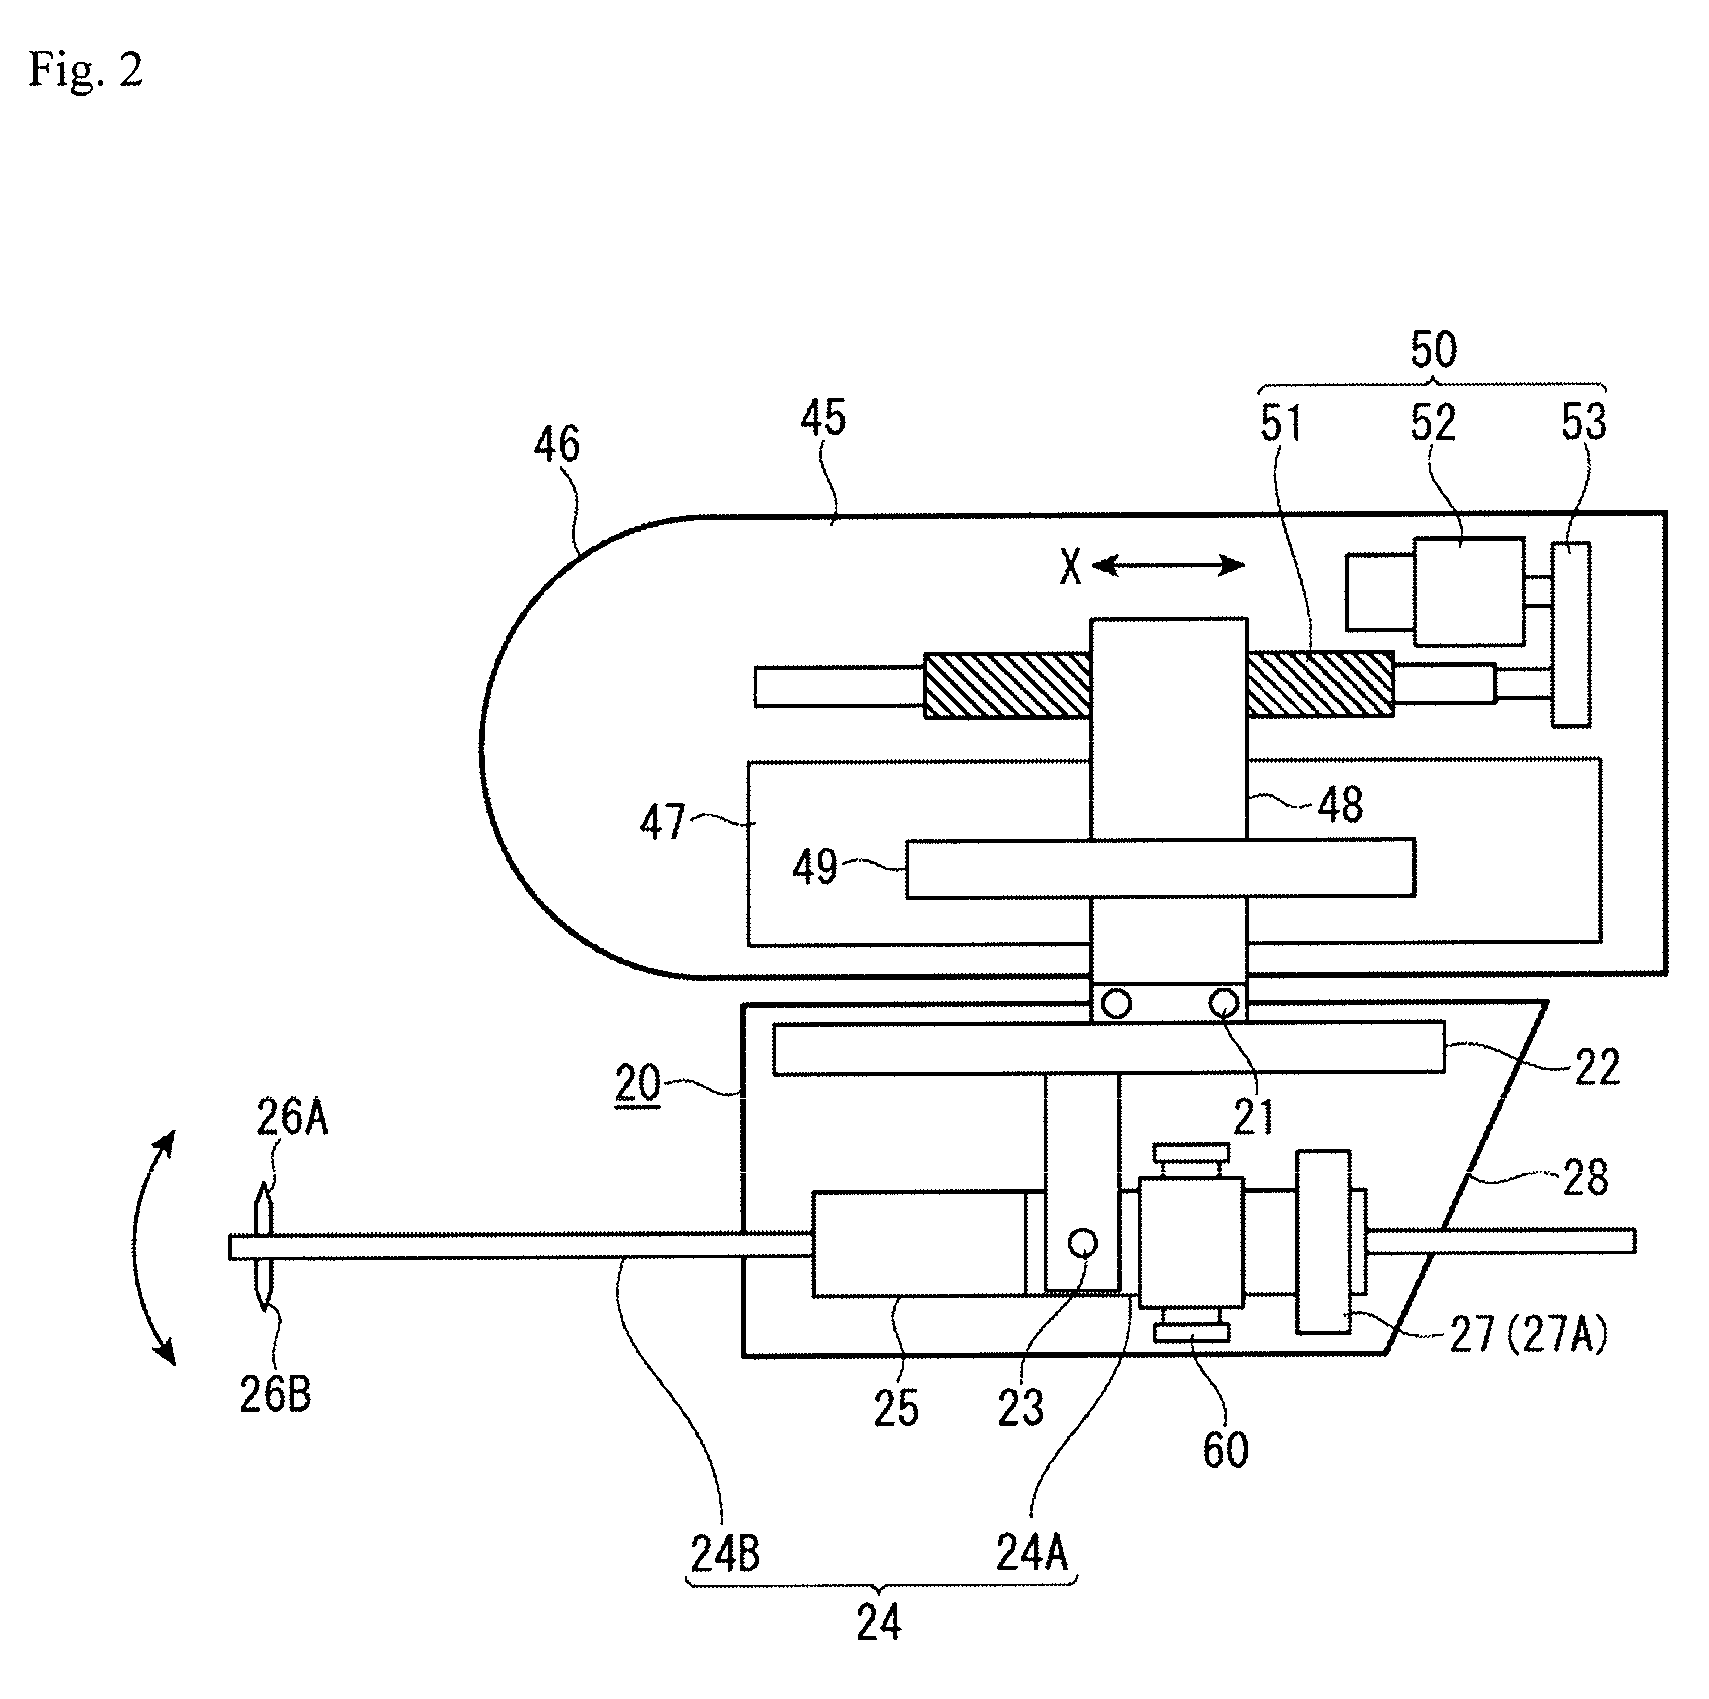 Method of calibrating surface texture measurement device